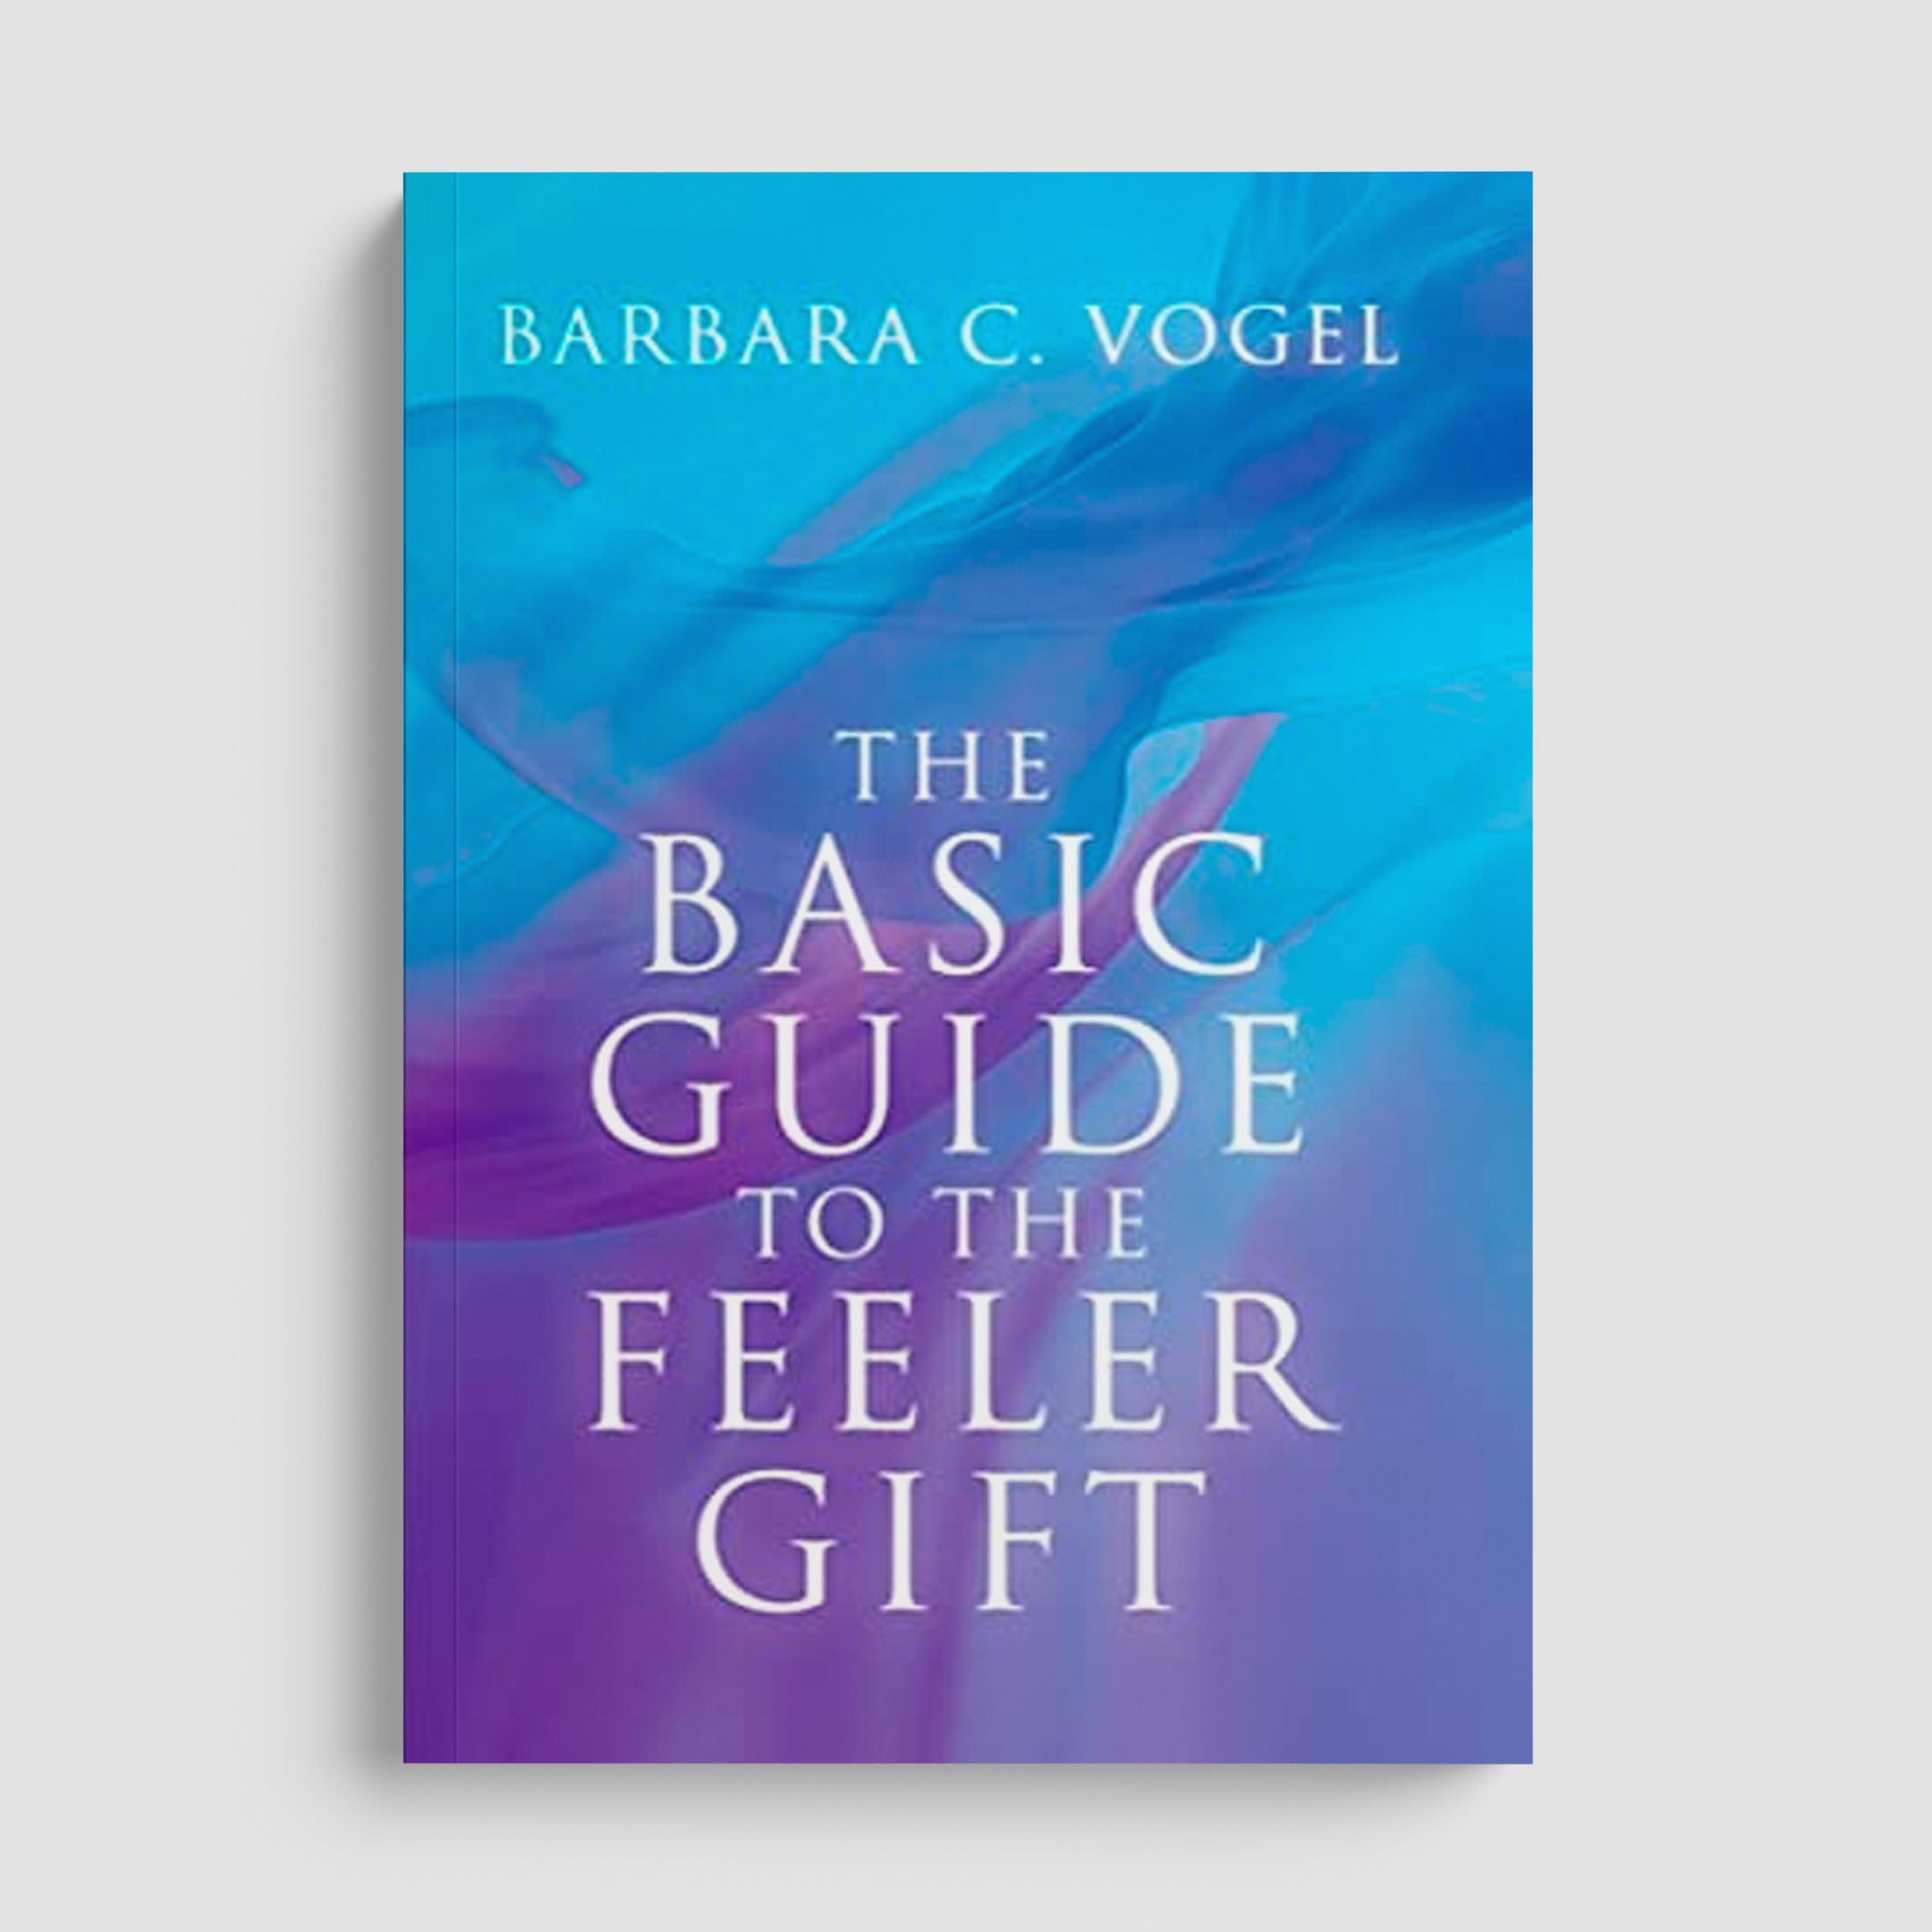 The Basic Guide to the Feeler Gift